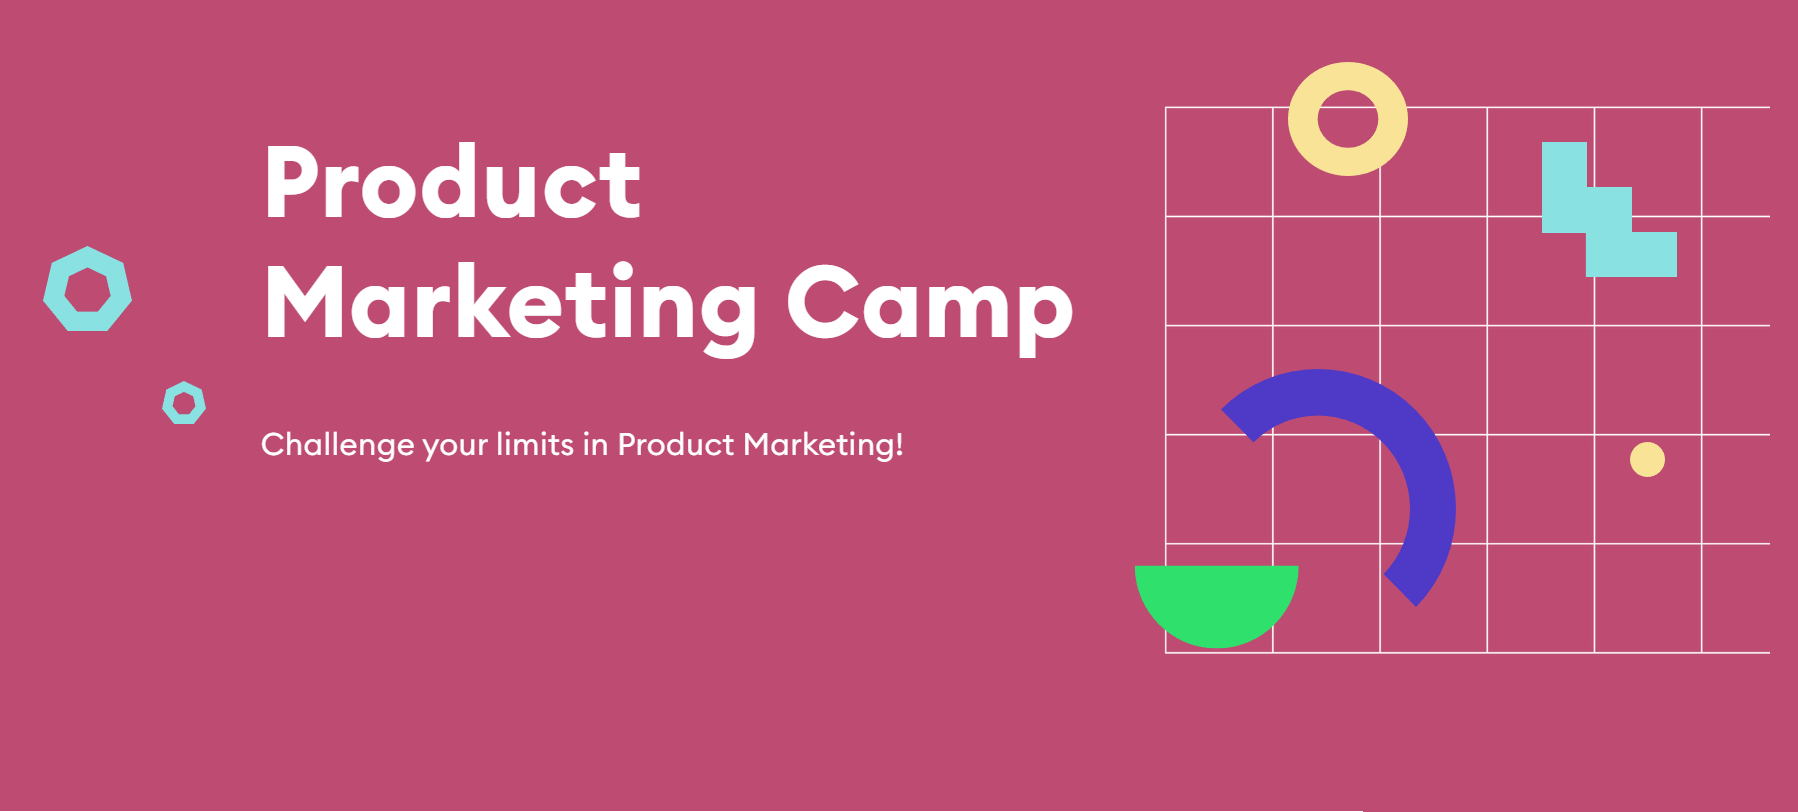 Product Marketing Camp